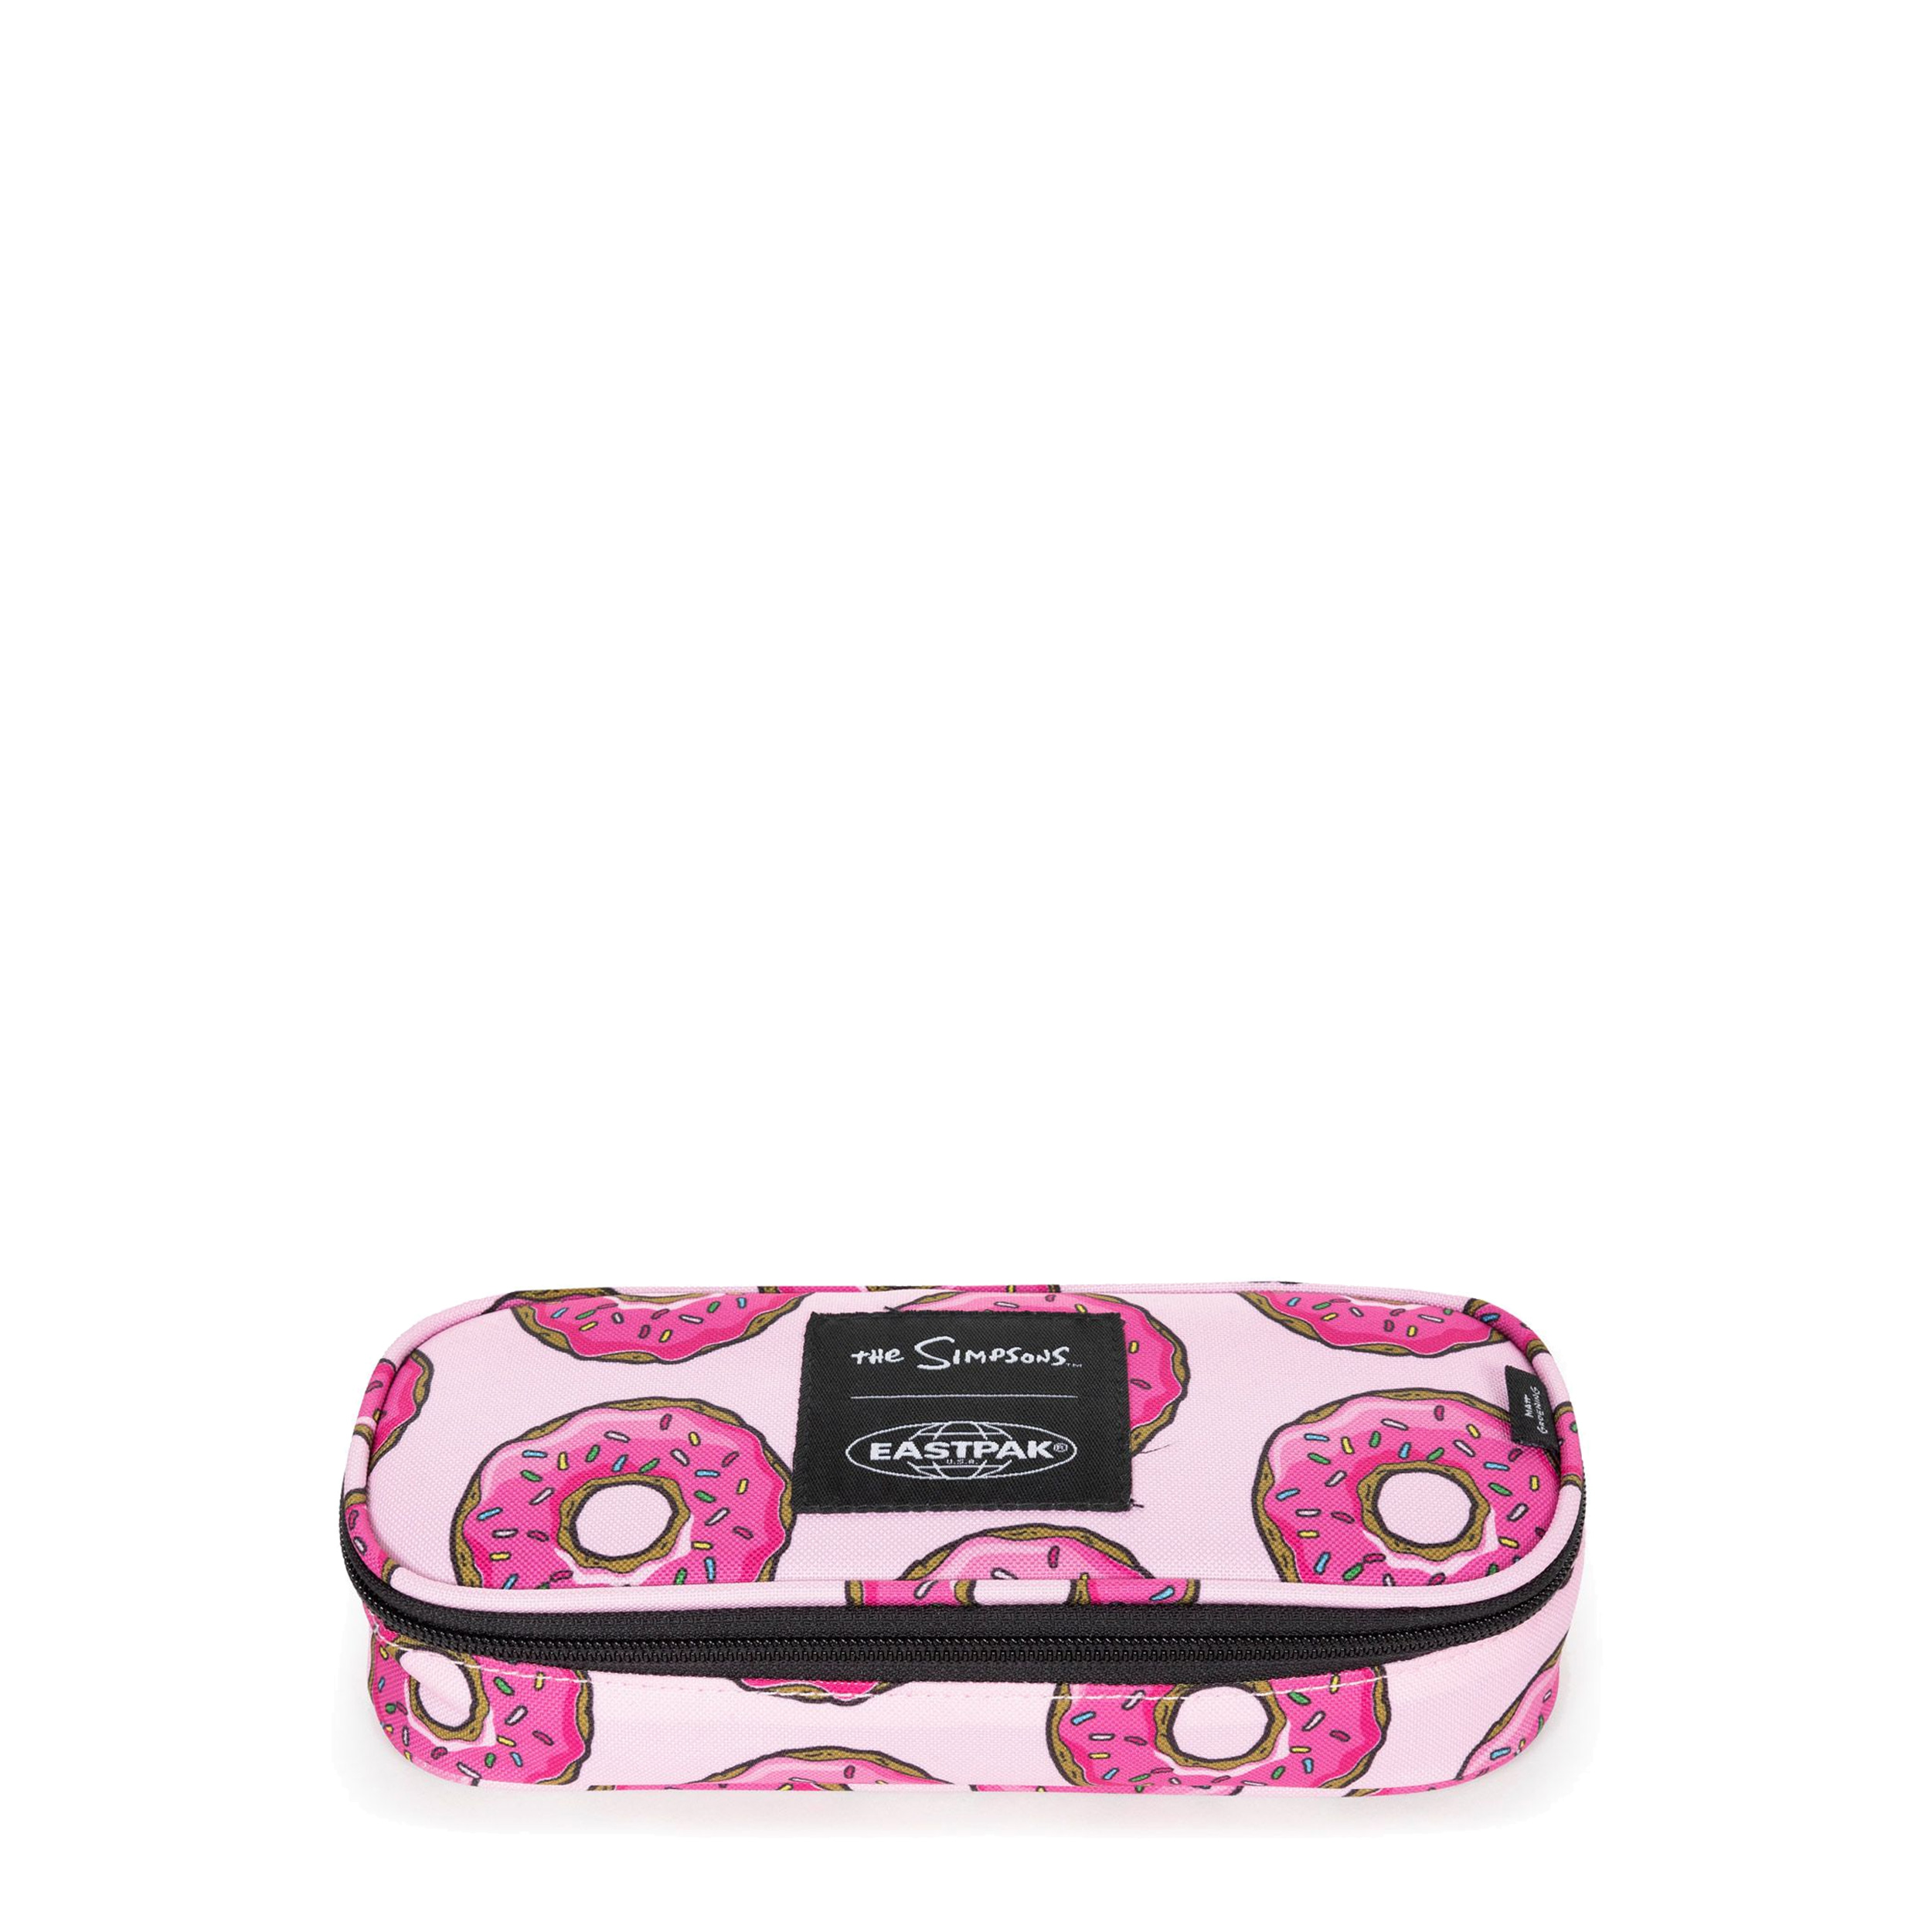 Trousse Oval Eastpak The Simsons simpsons donuts avant